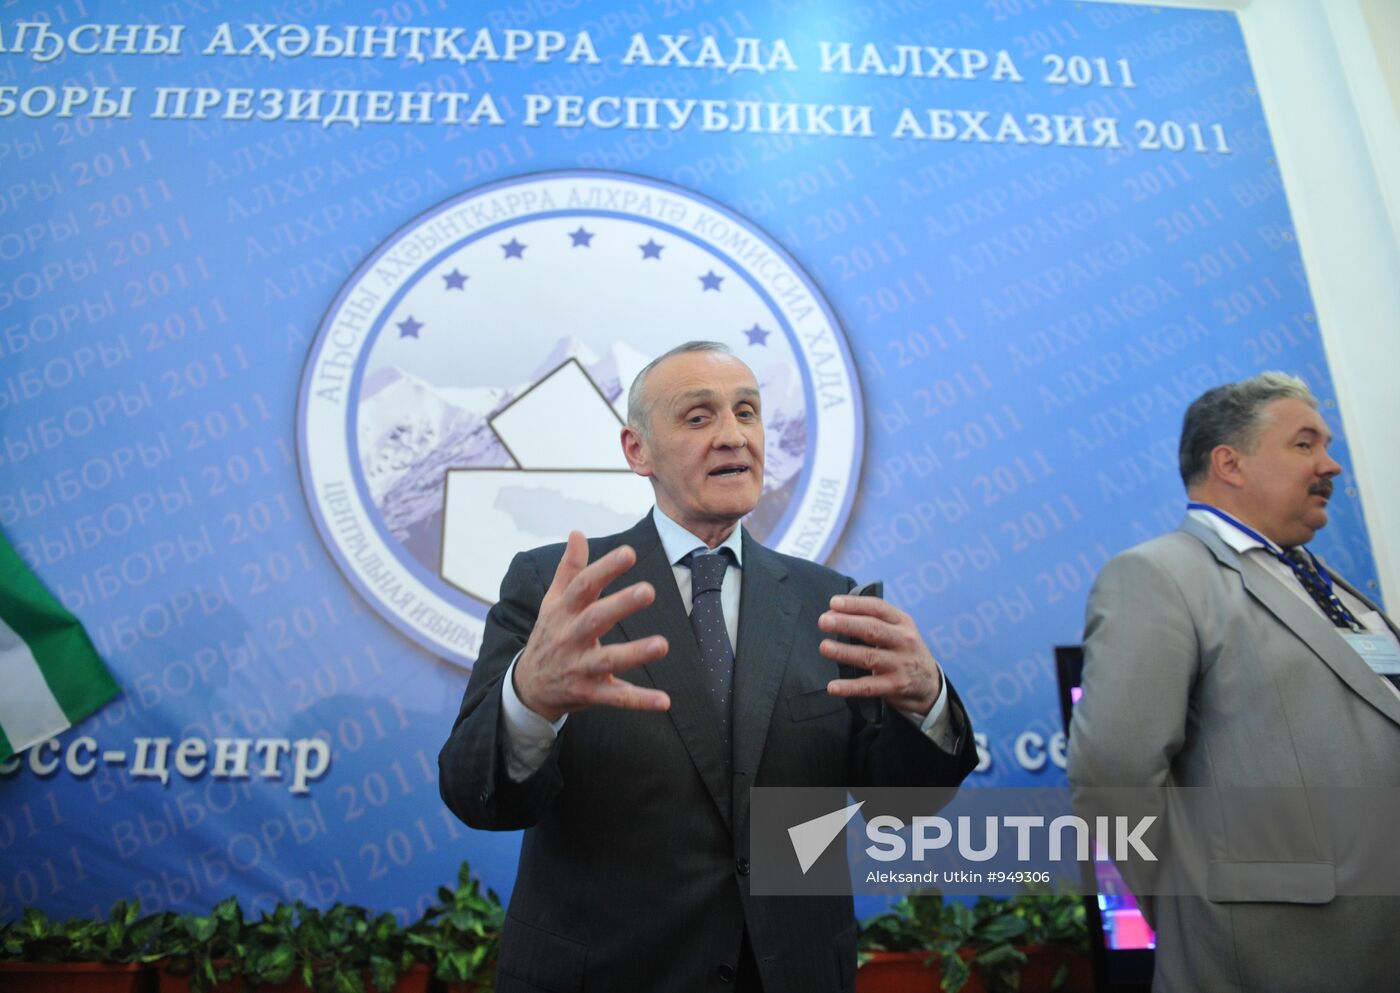 Presidential election results announced in Abkhazia